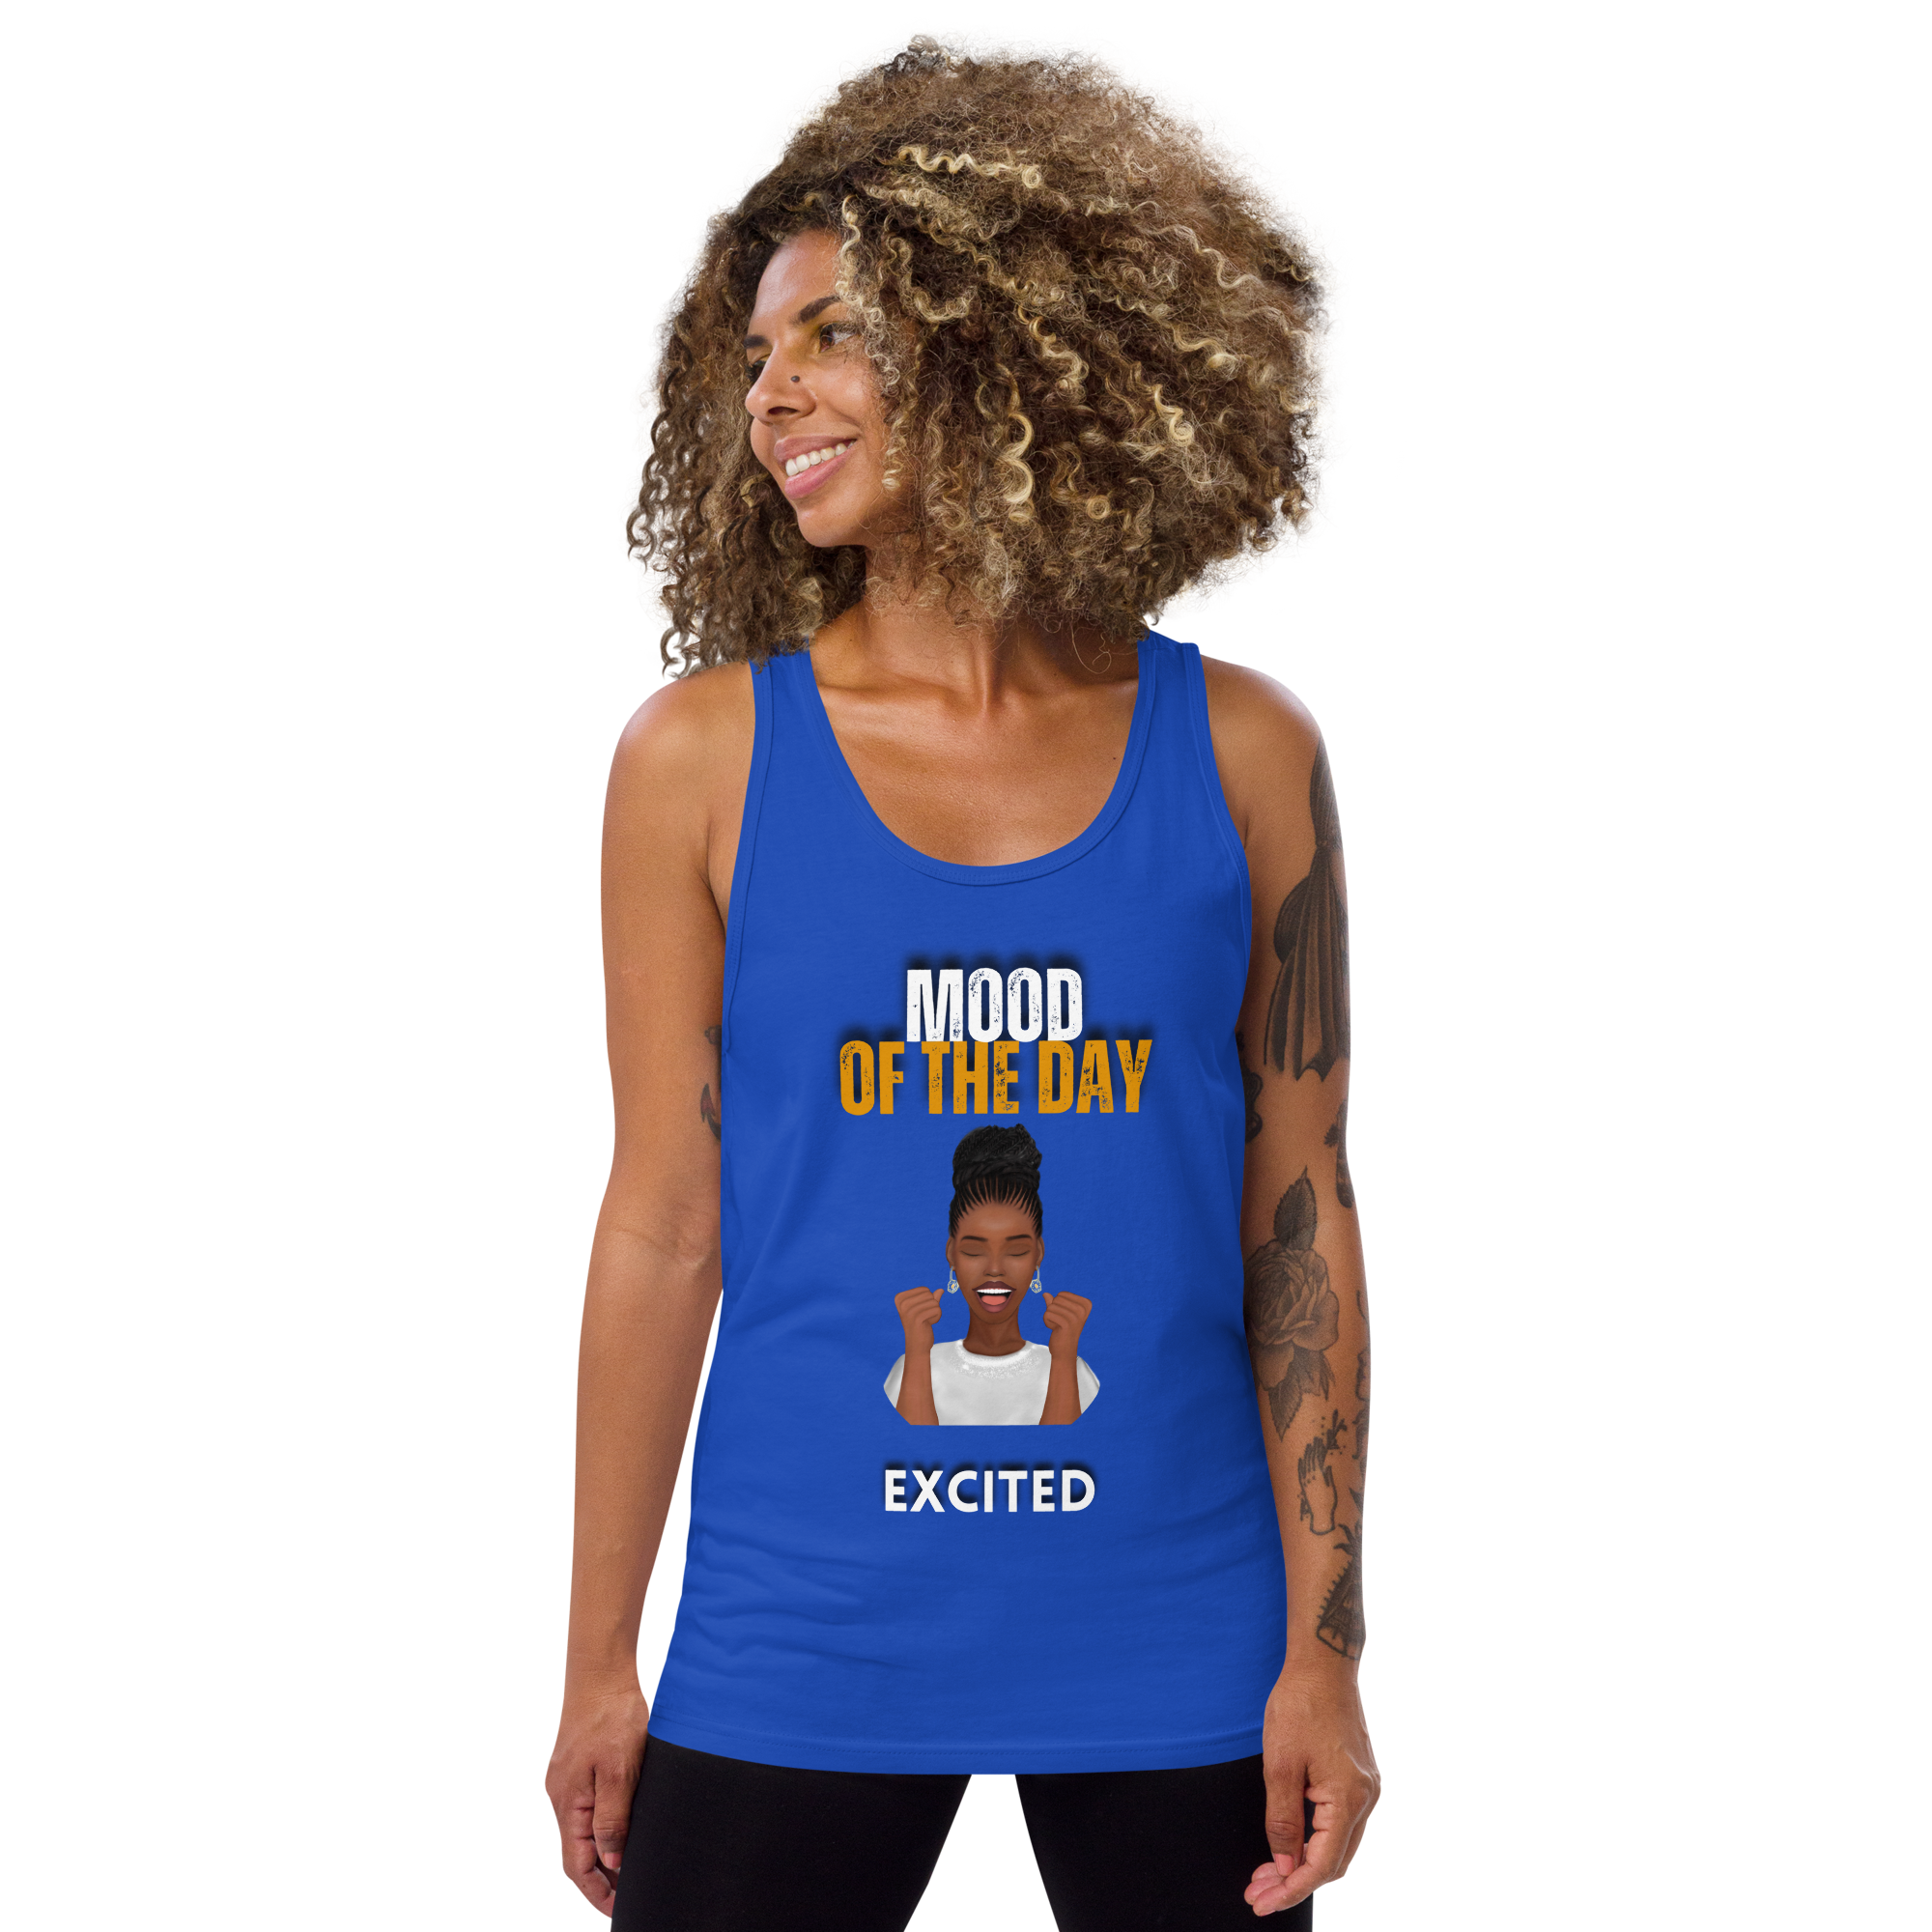 Mood of the Day Tank Top - Excited